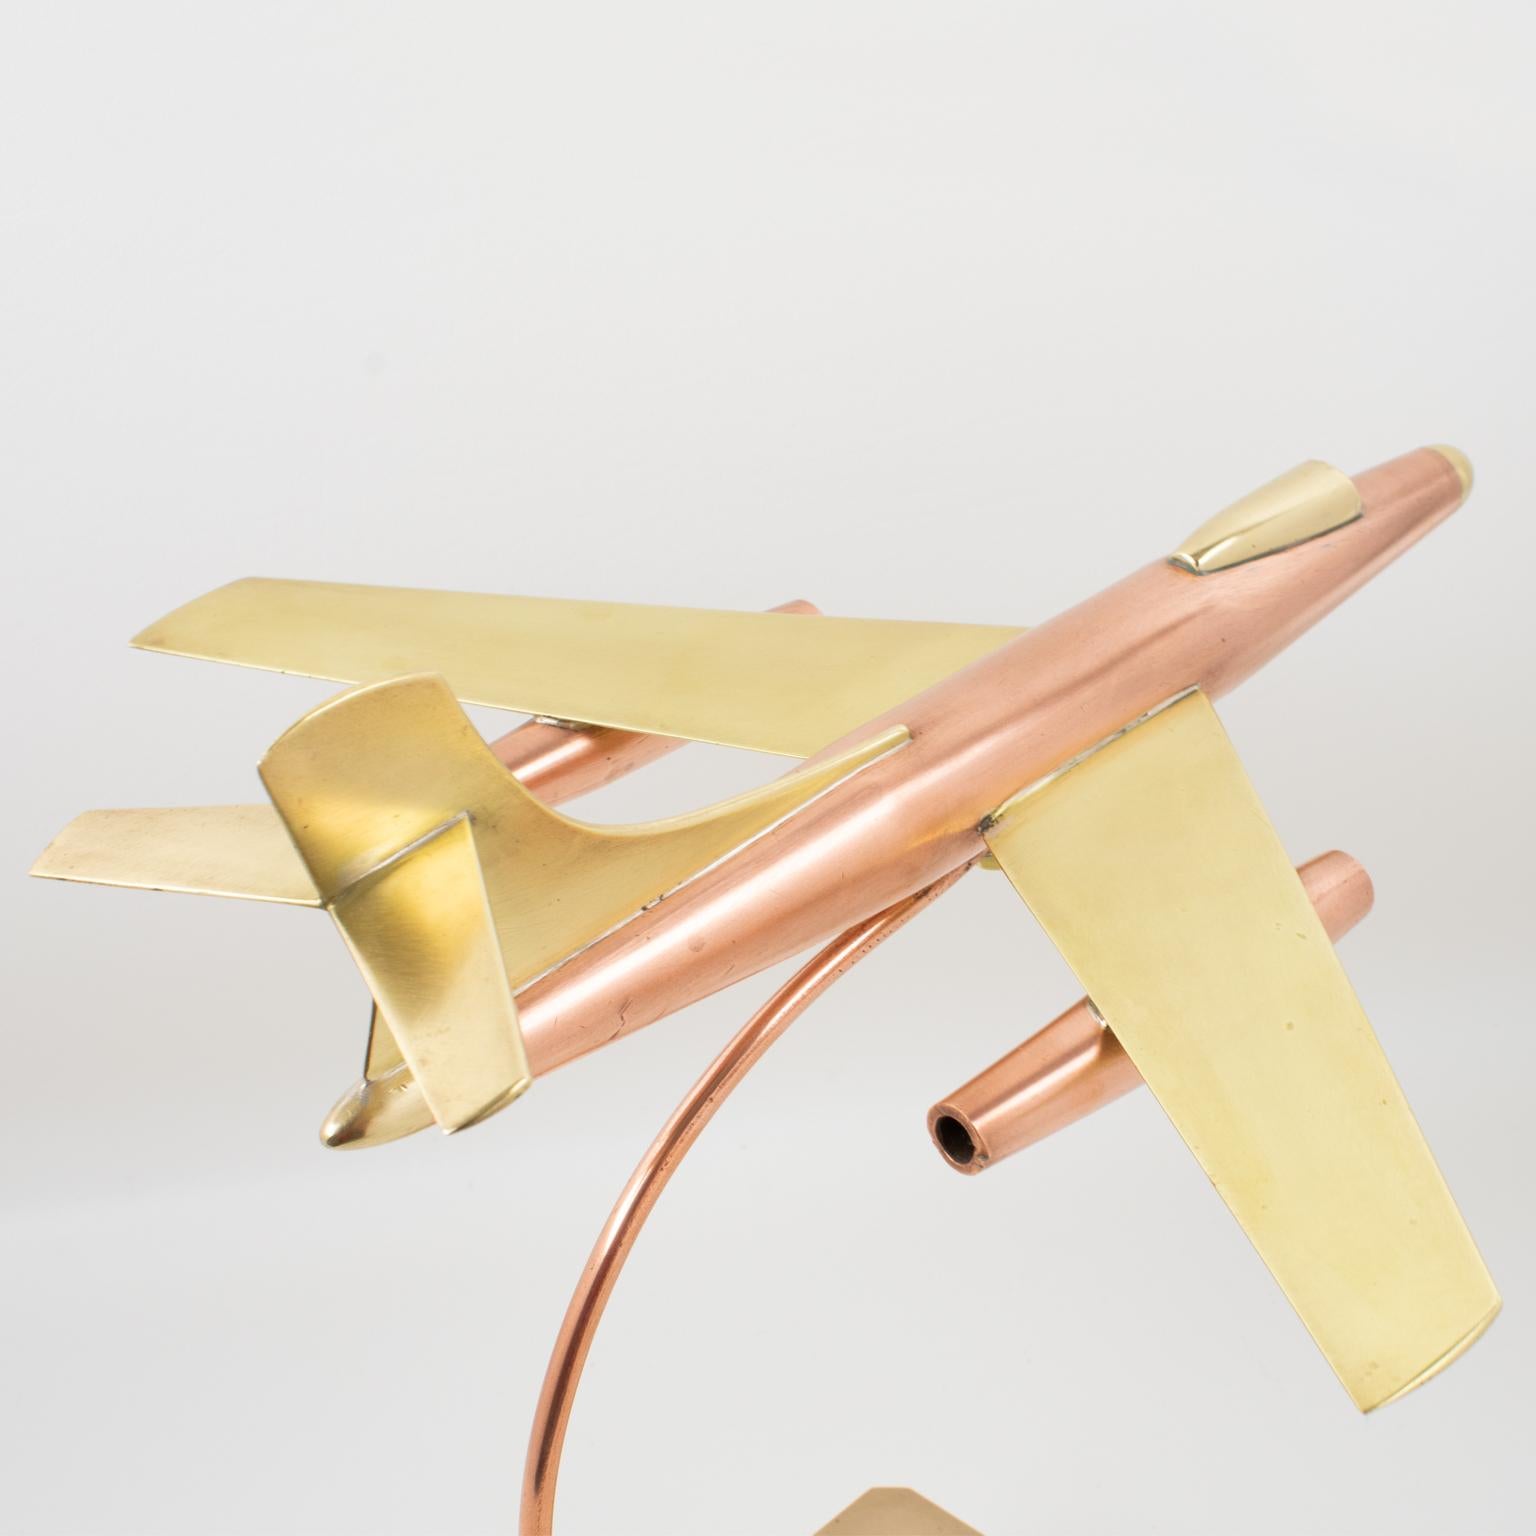 Brass and Copper Airplane Jet Aviation Model, France 1960s For Sale 2